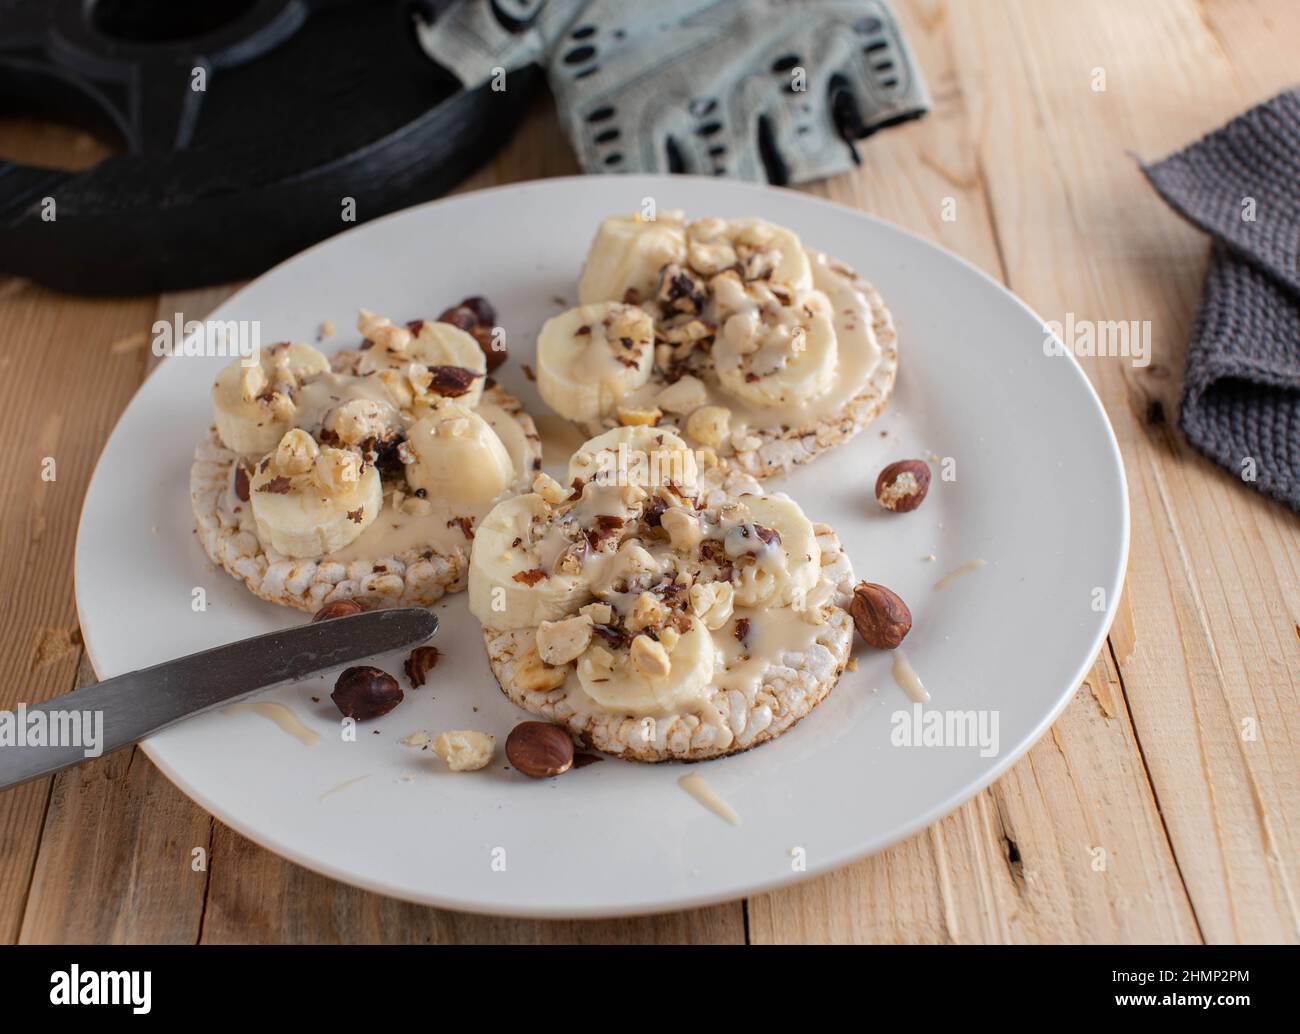 Brown rice cracker with almond butter, bananas and hazelnuts. Healthy energy breakfast or snack Stock Photo